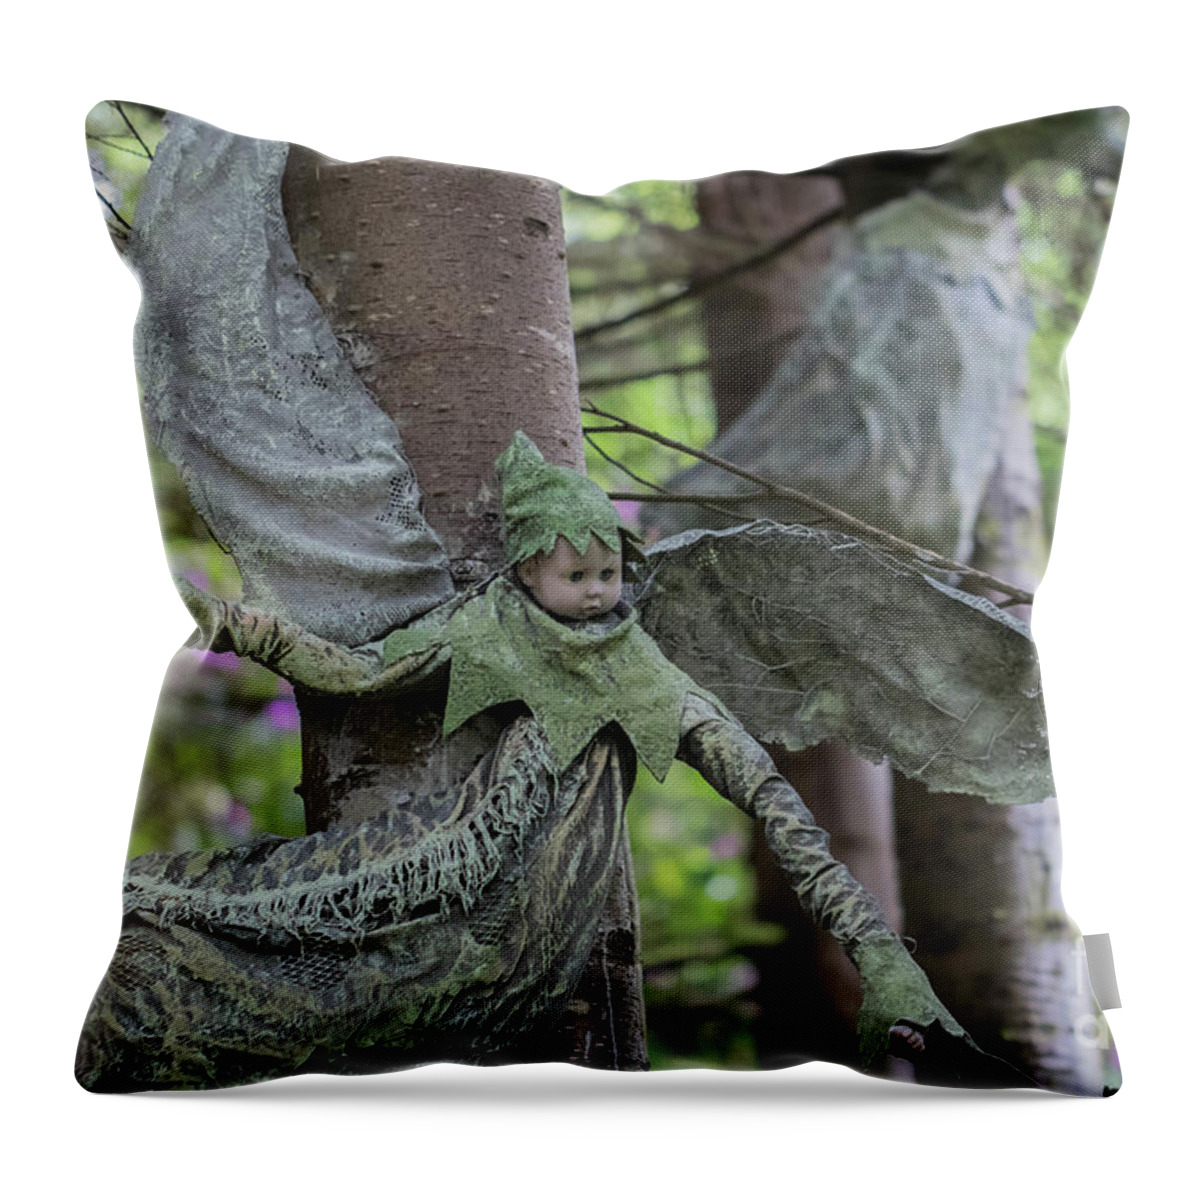 Elf Throw Pillow featuring the photograph Elf by Eva Lechner